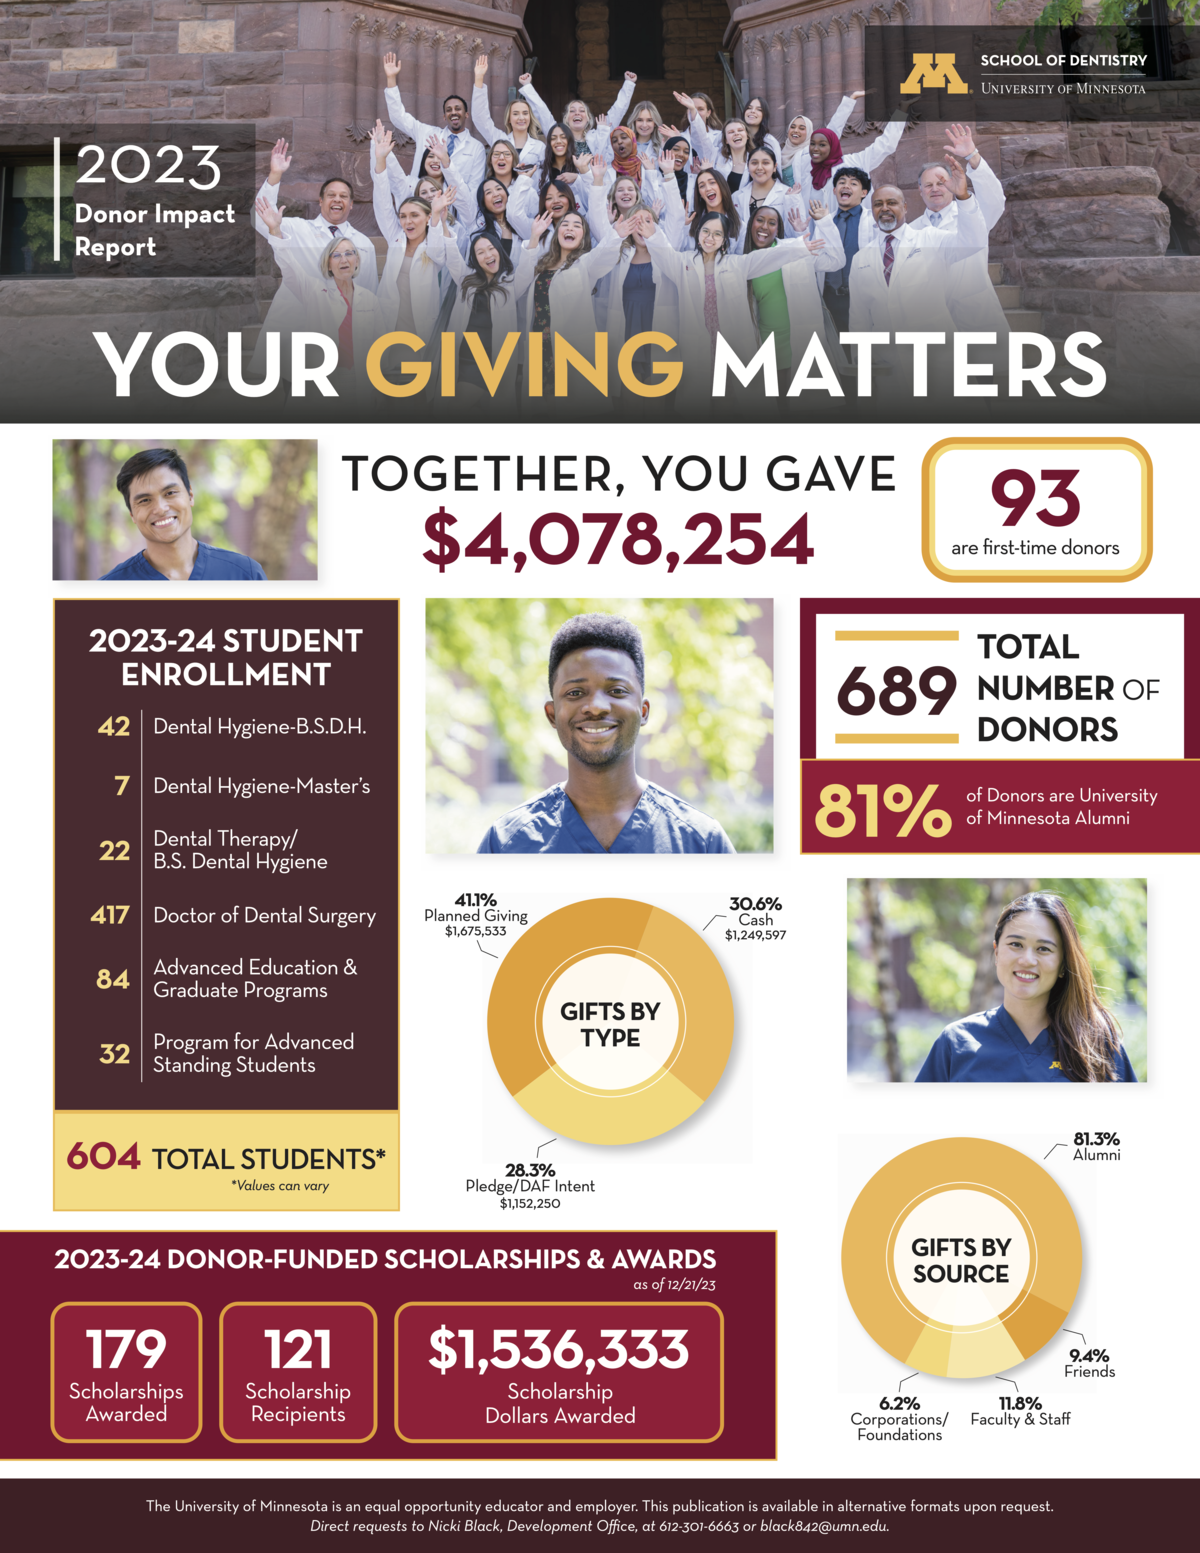 2023 Donor Impact Report School of Dentistry. Together, you gave over $4 million.